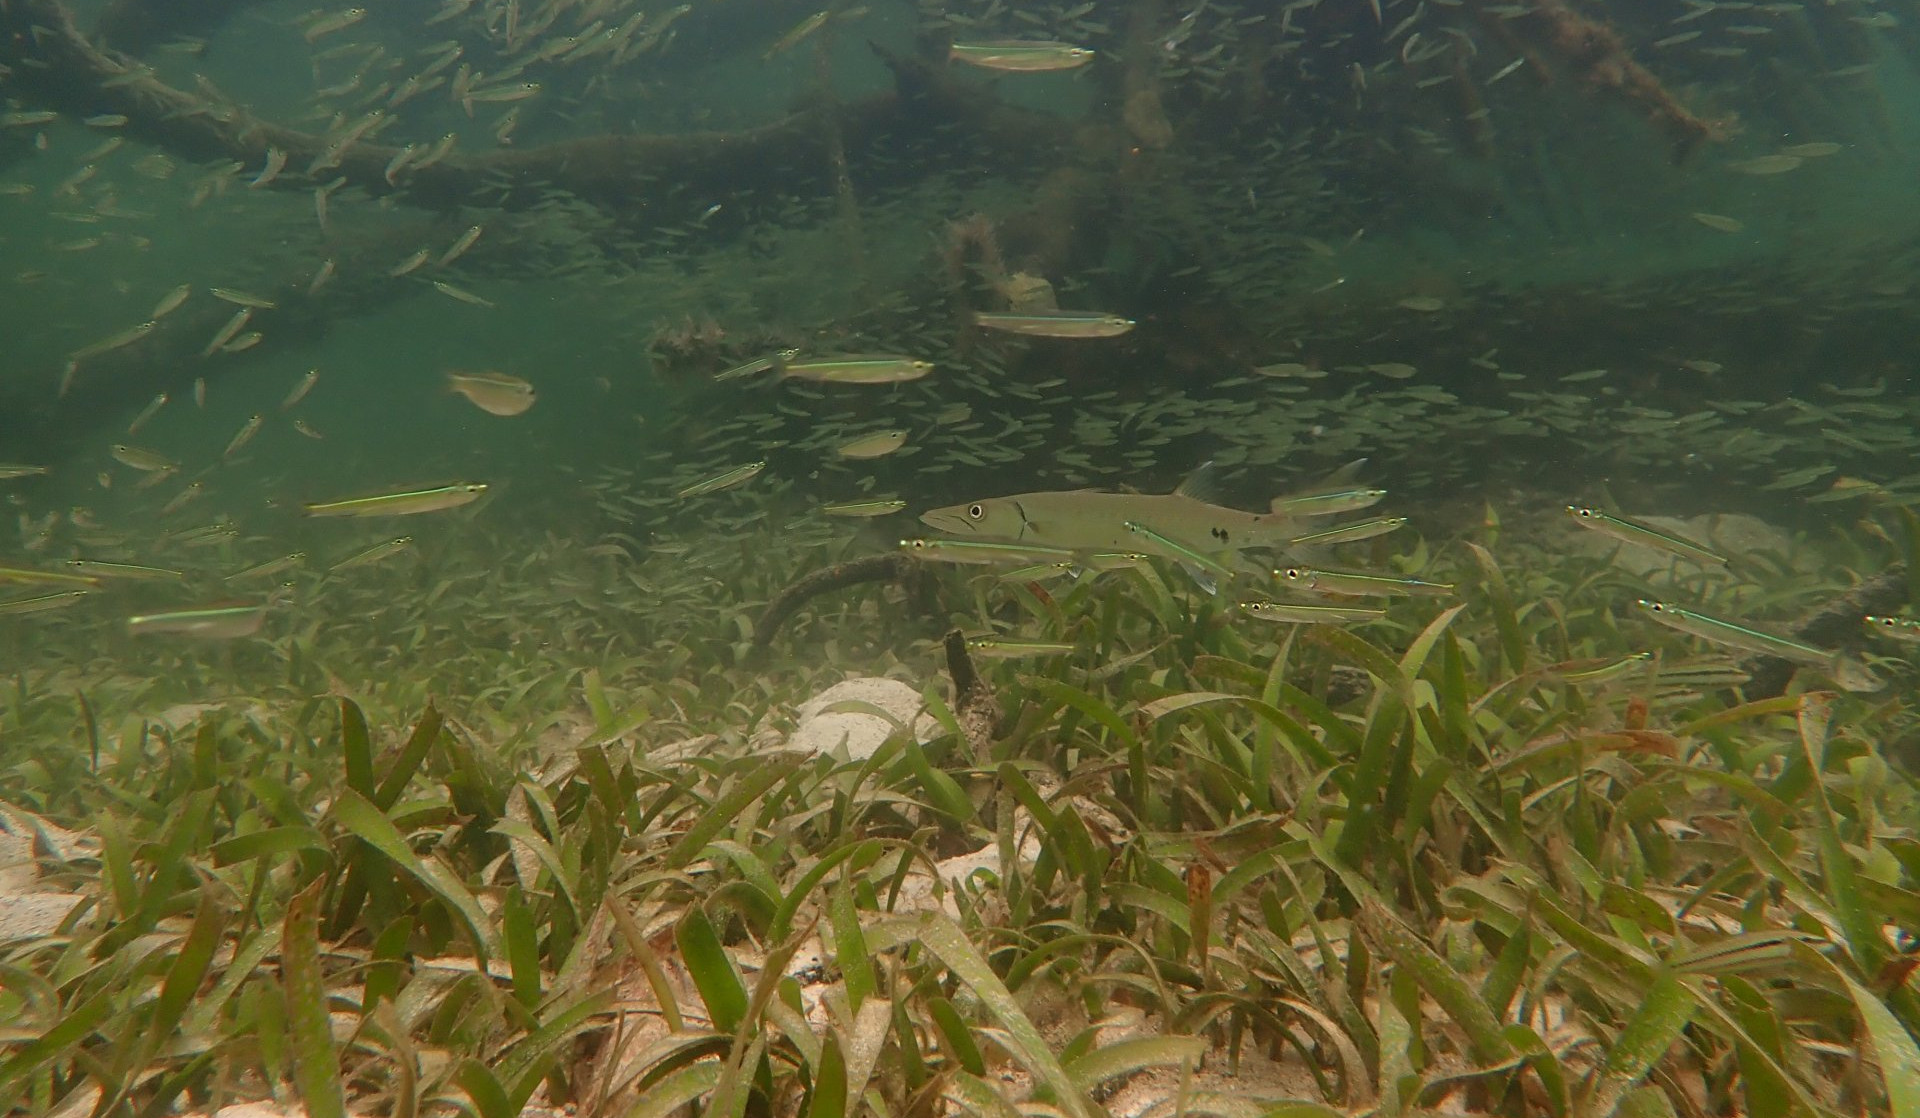 This is where the investigated clams like to live: Lucinid habitat characterized by sandy patches within seagrass (Thalassia testudinum) beds in Bocas del Toro, Panama. (© Laetitia Wilkins)